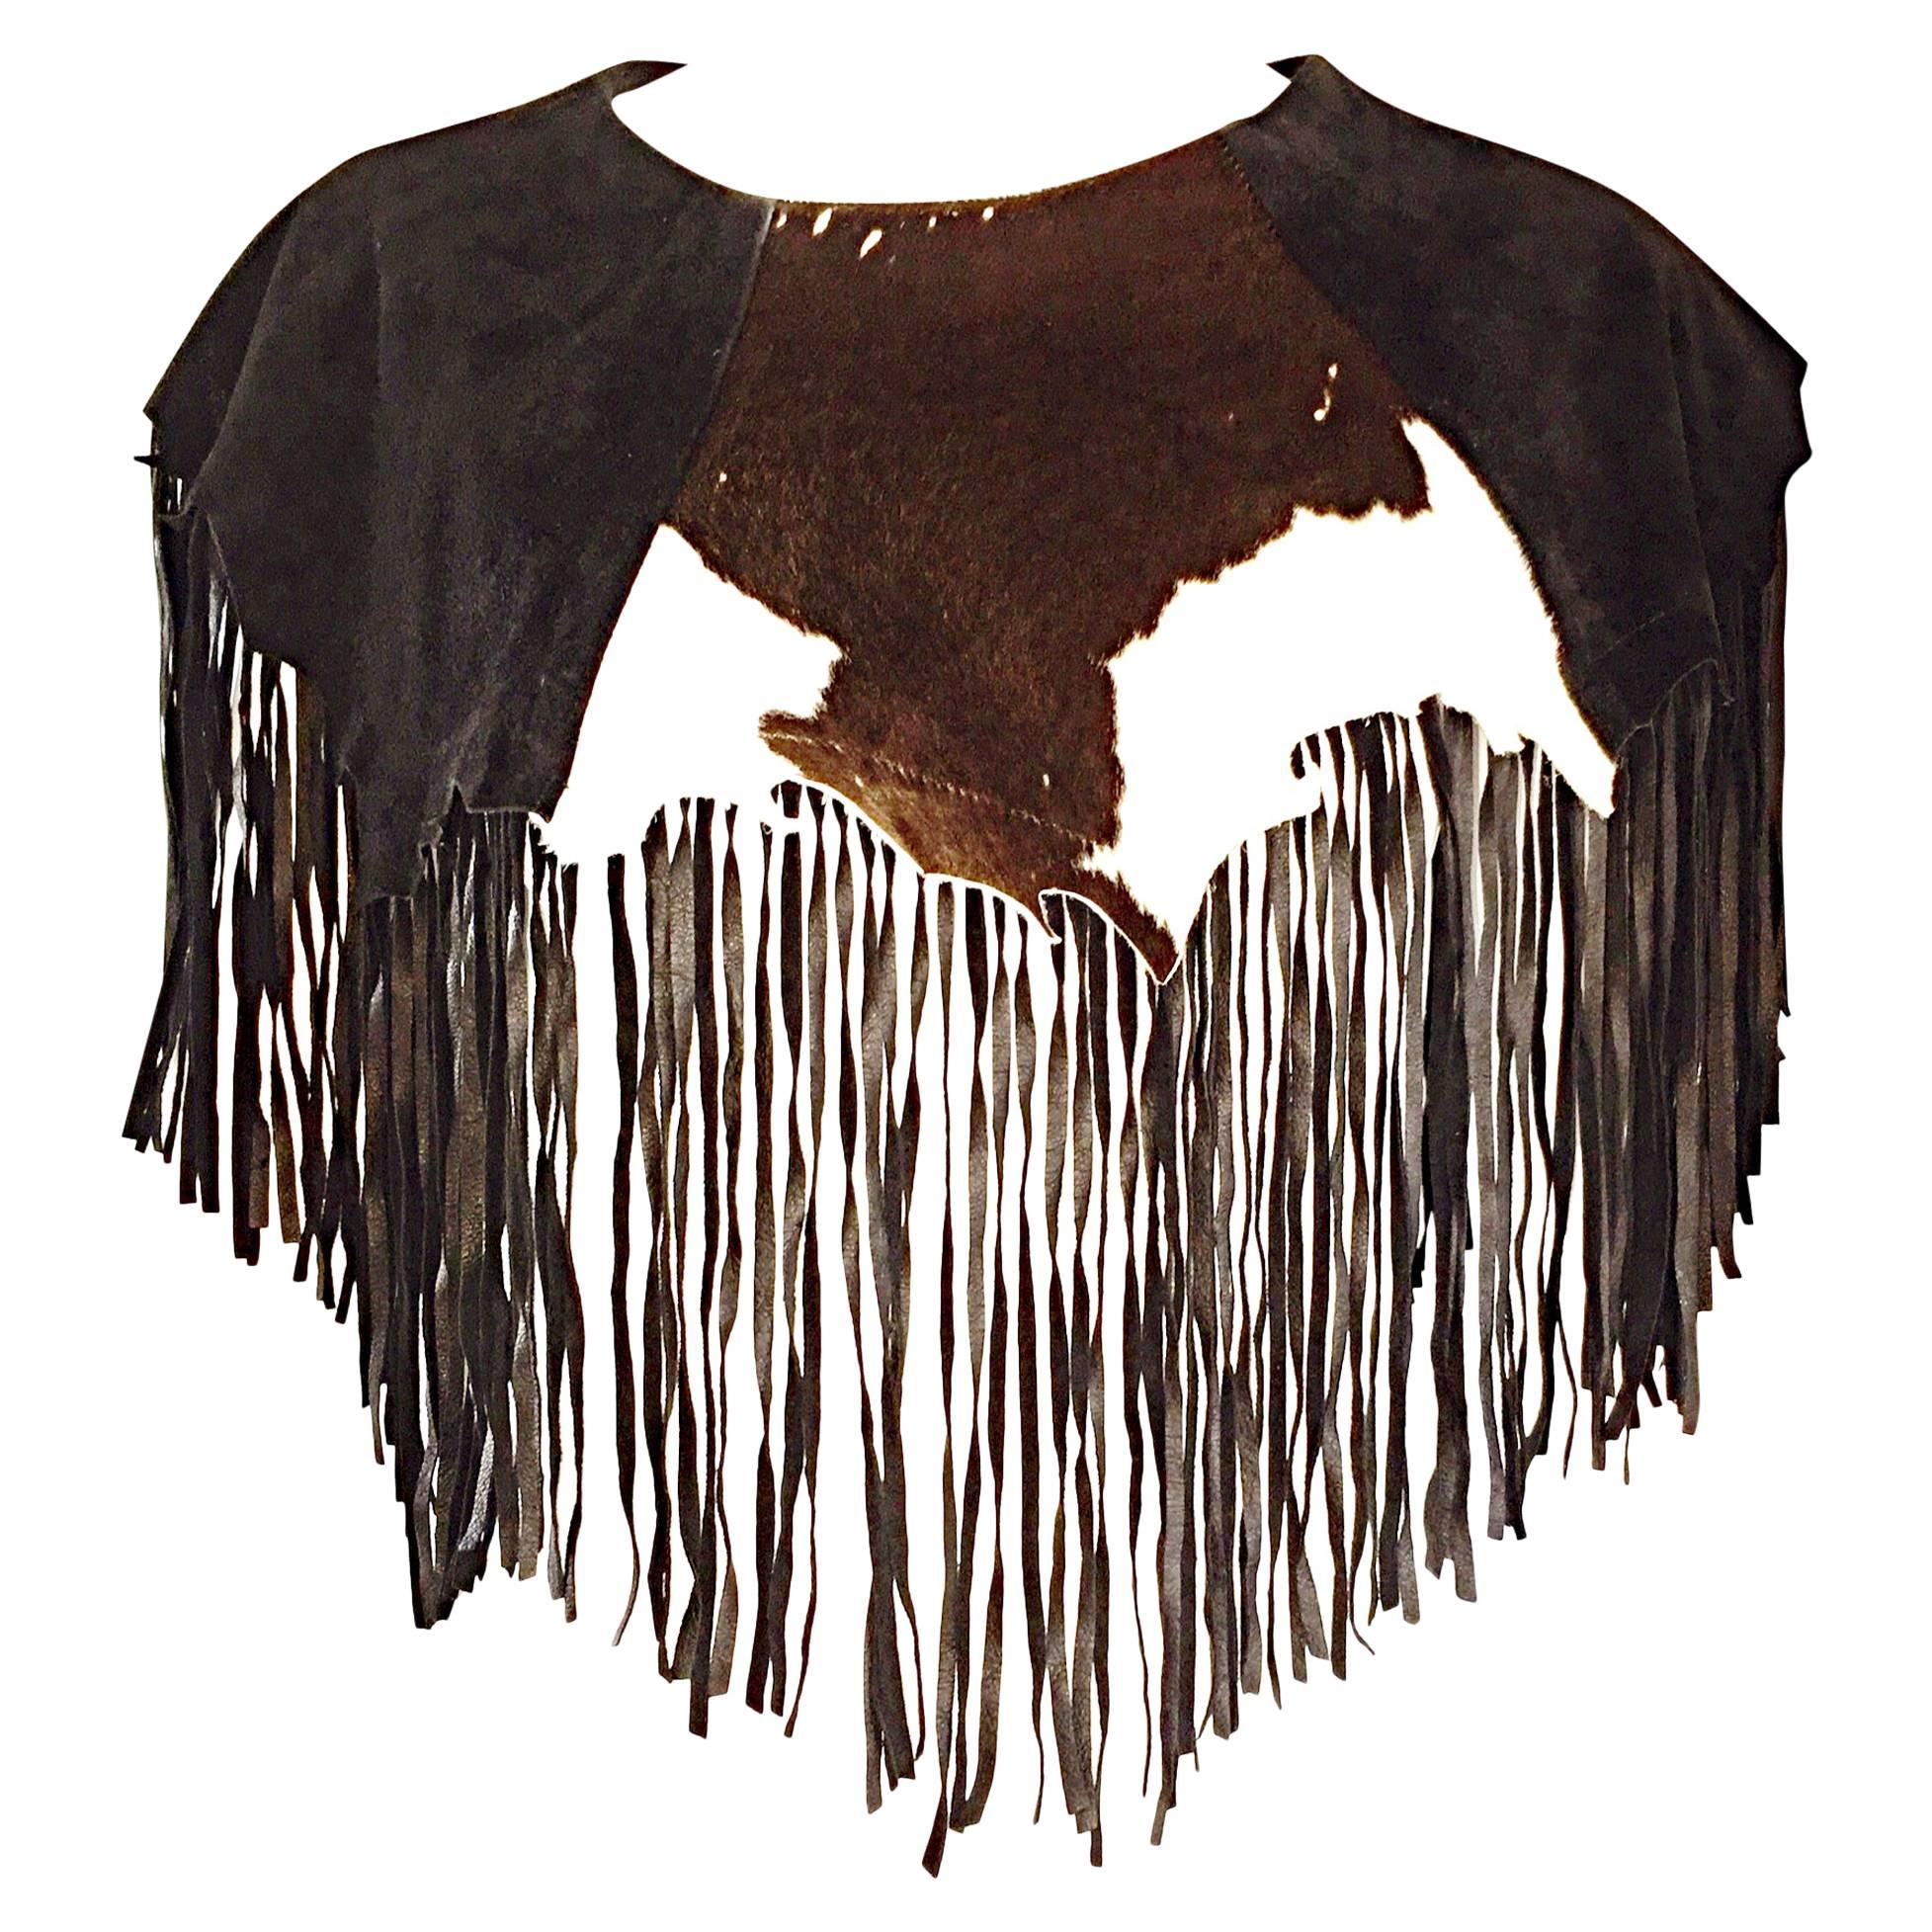 Amazing Vintage Ricky Nell Cow Hide Leather + Suede Fringed Boho Bib Collar 